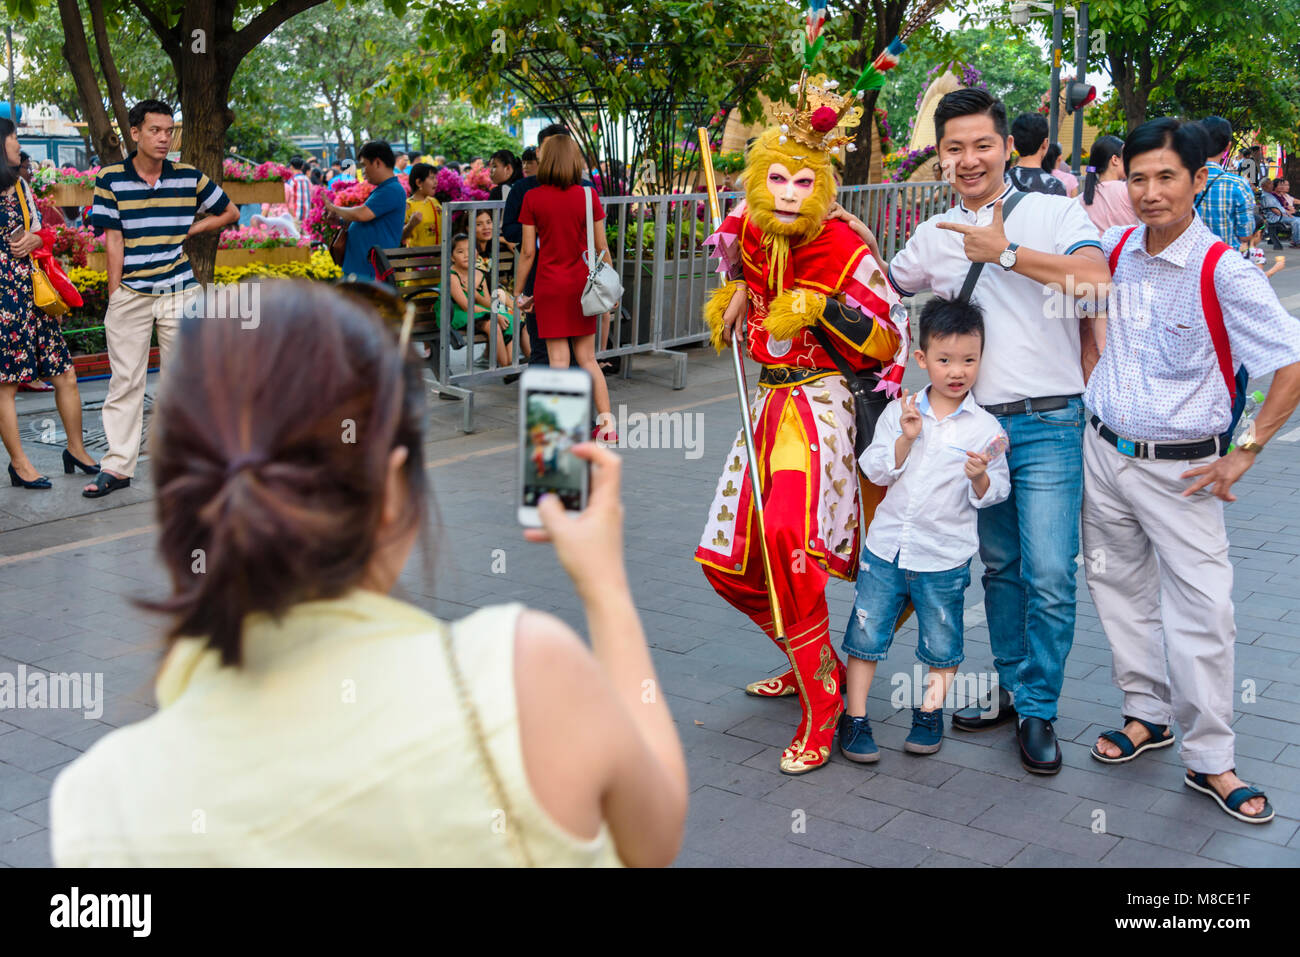 A Group of people have a photograph taken with a man in a traditional monkey costume, Ho Chi Minh City, Saigon, Vietnam Stock Photo